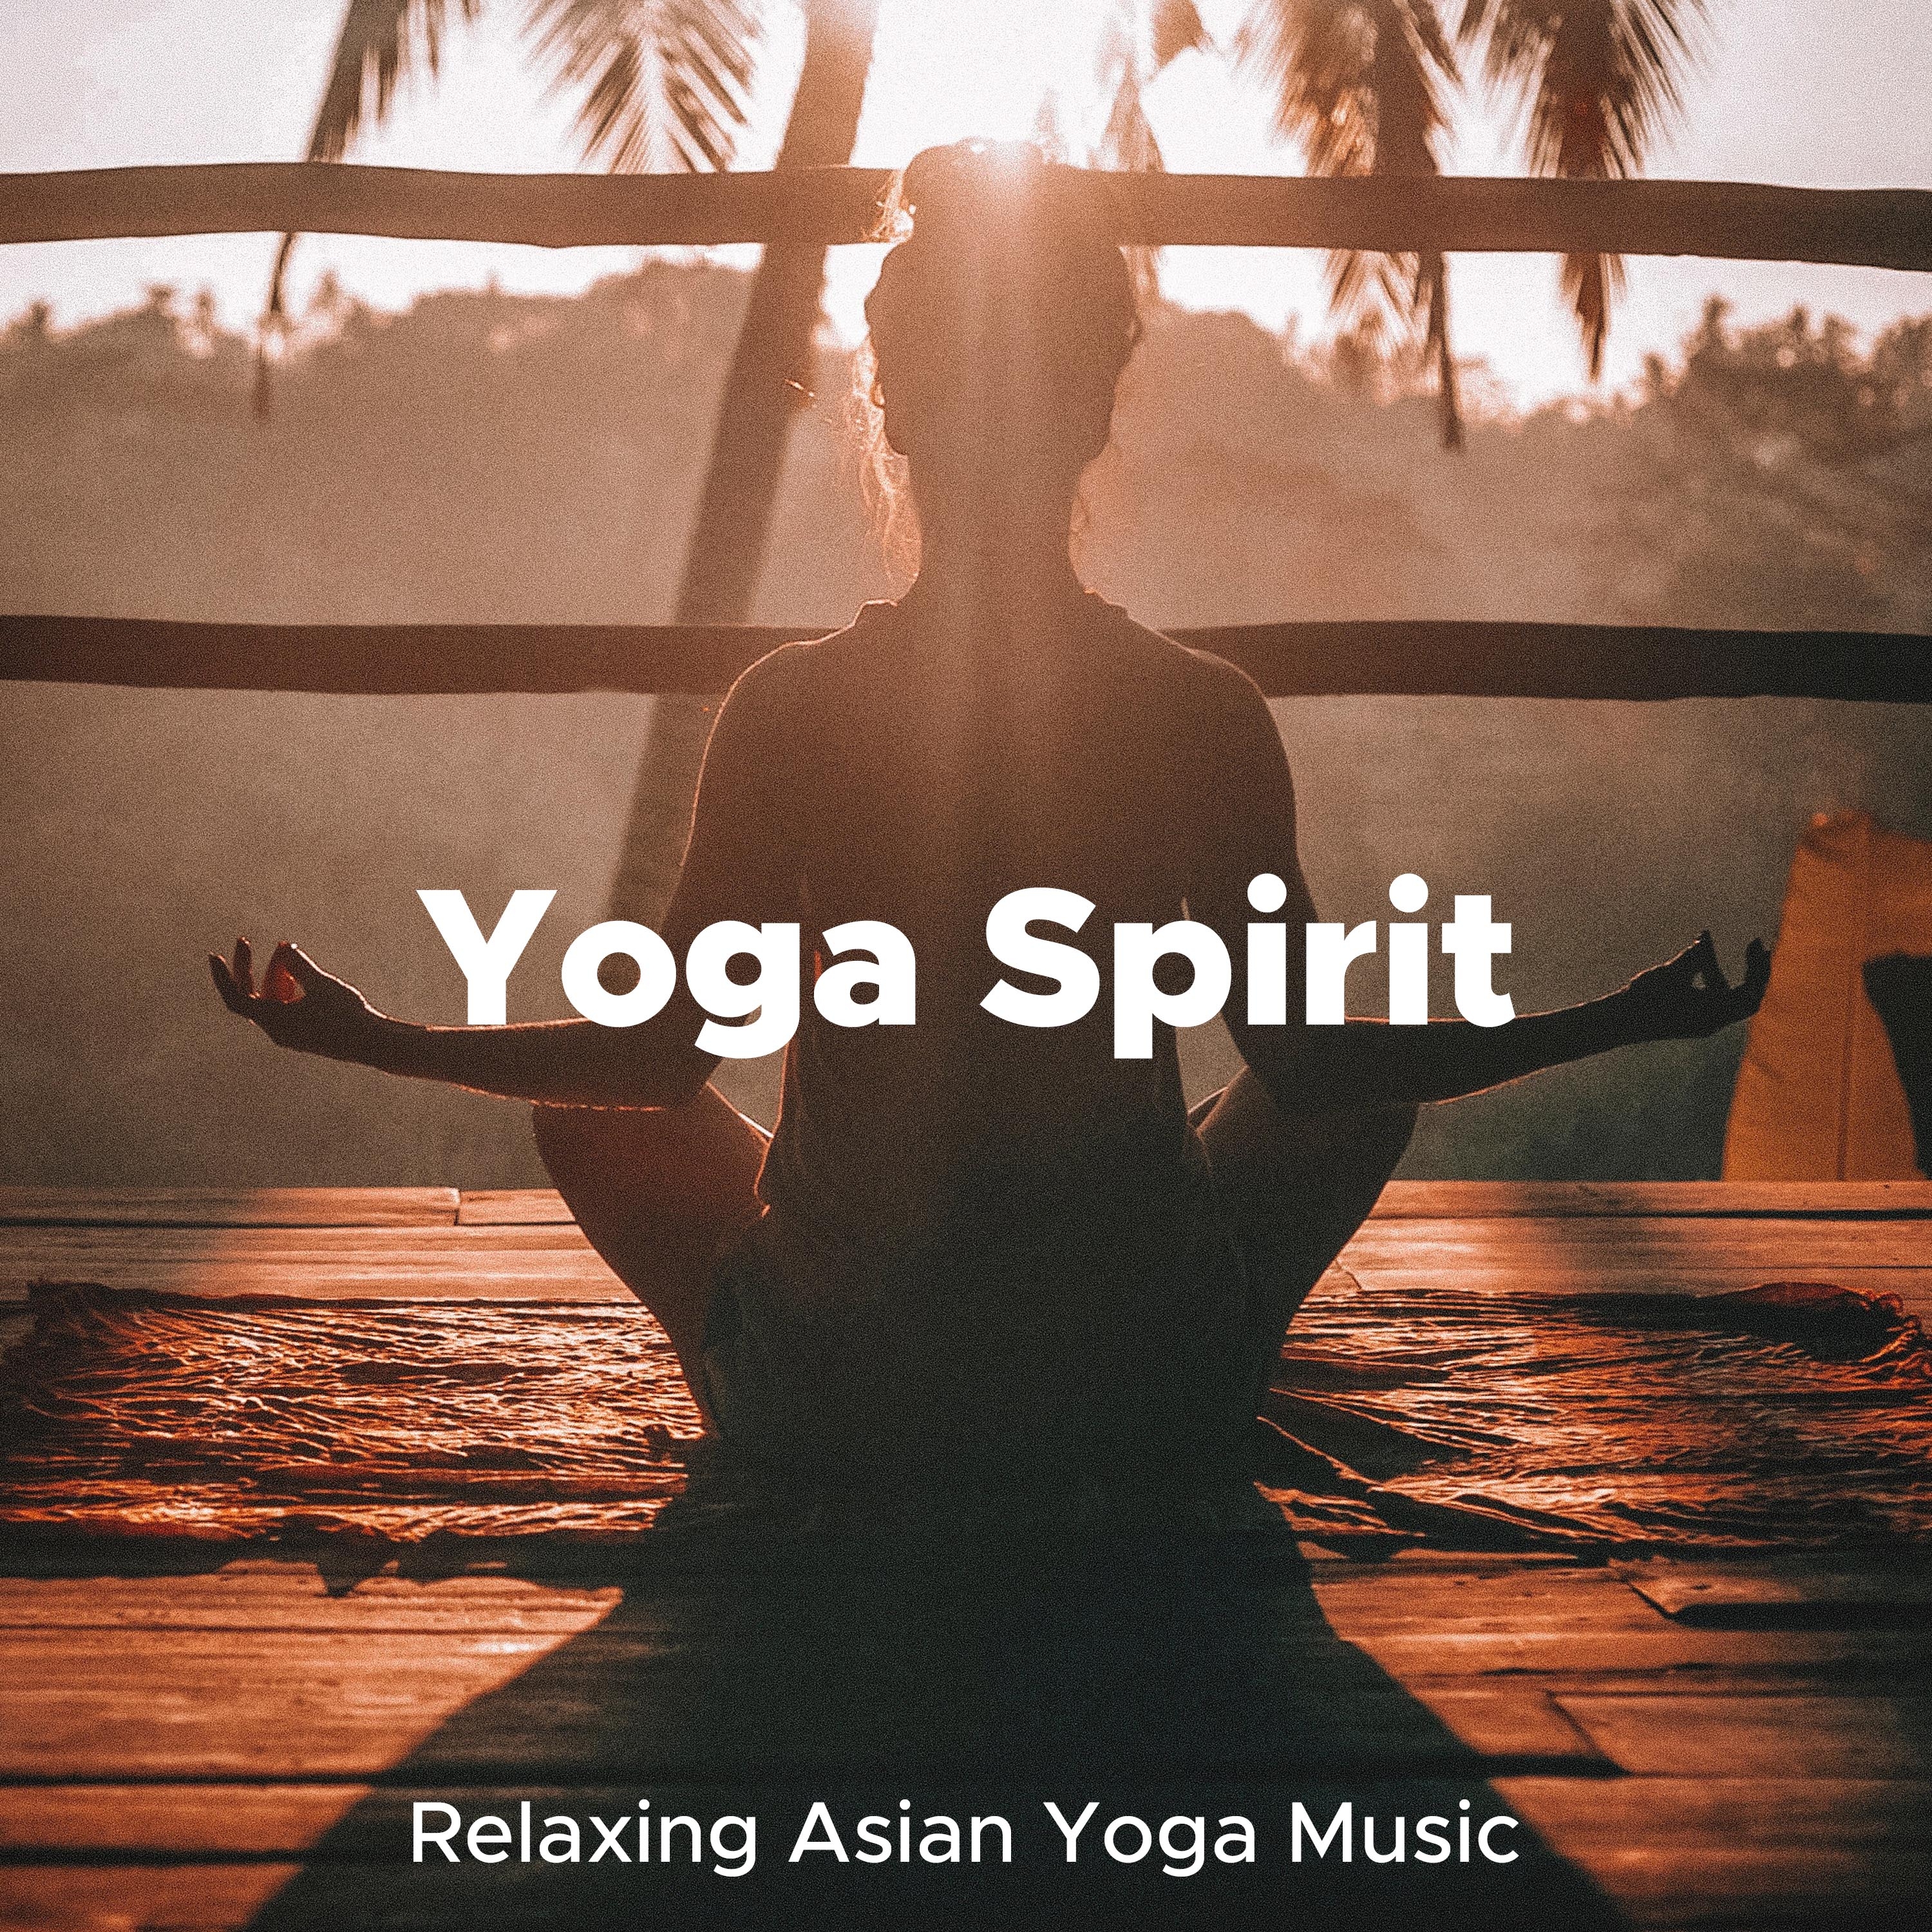 Yoga Spirit - Relaxing Asian Yoga Music with Nature Sounds, Soothing Piano Melodies